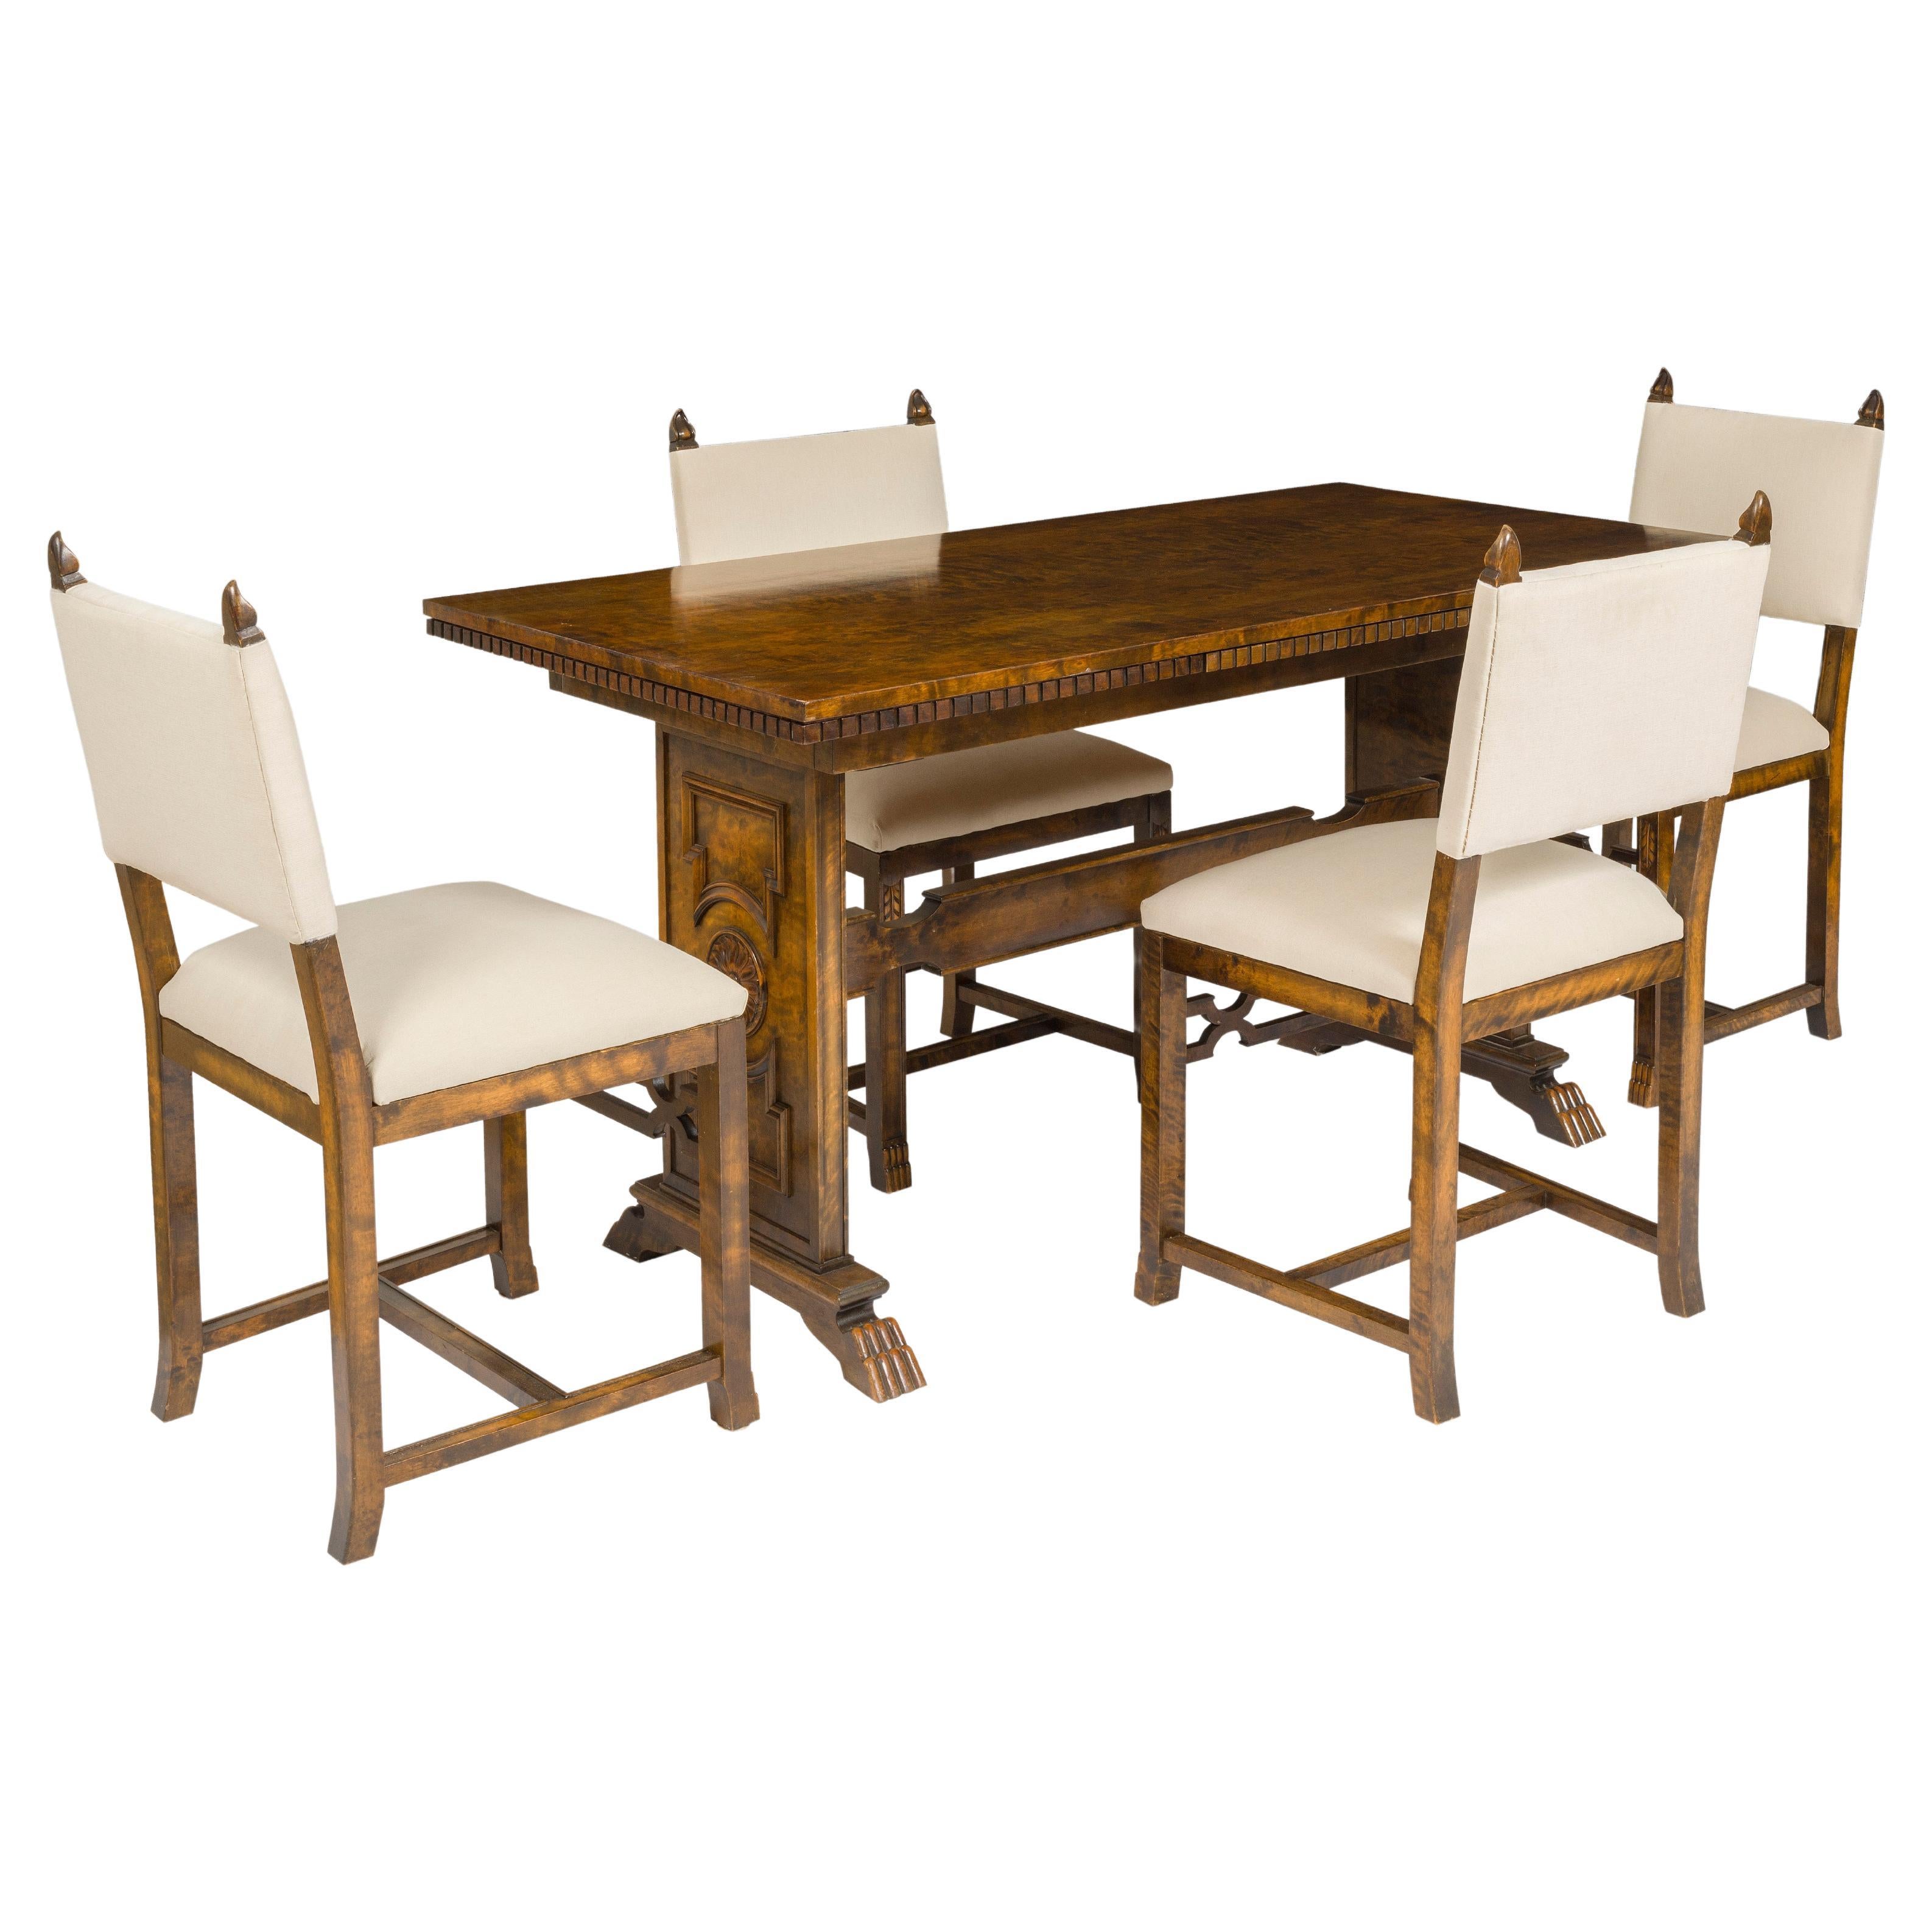 Axel Einar Hjorth Roma set extendable table and chairs, 1920's For Sale